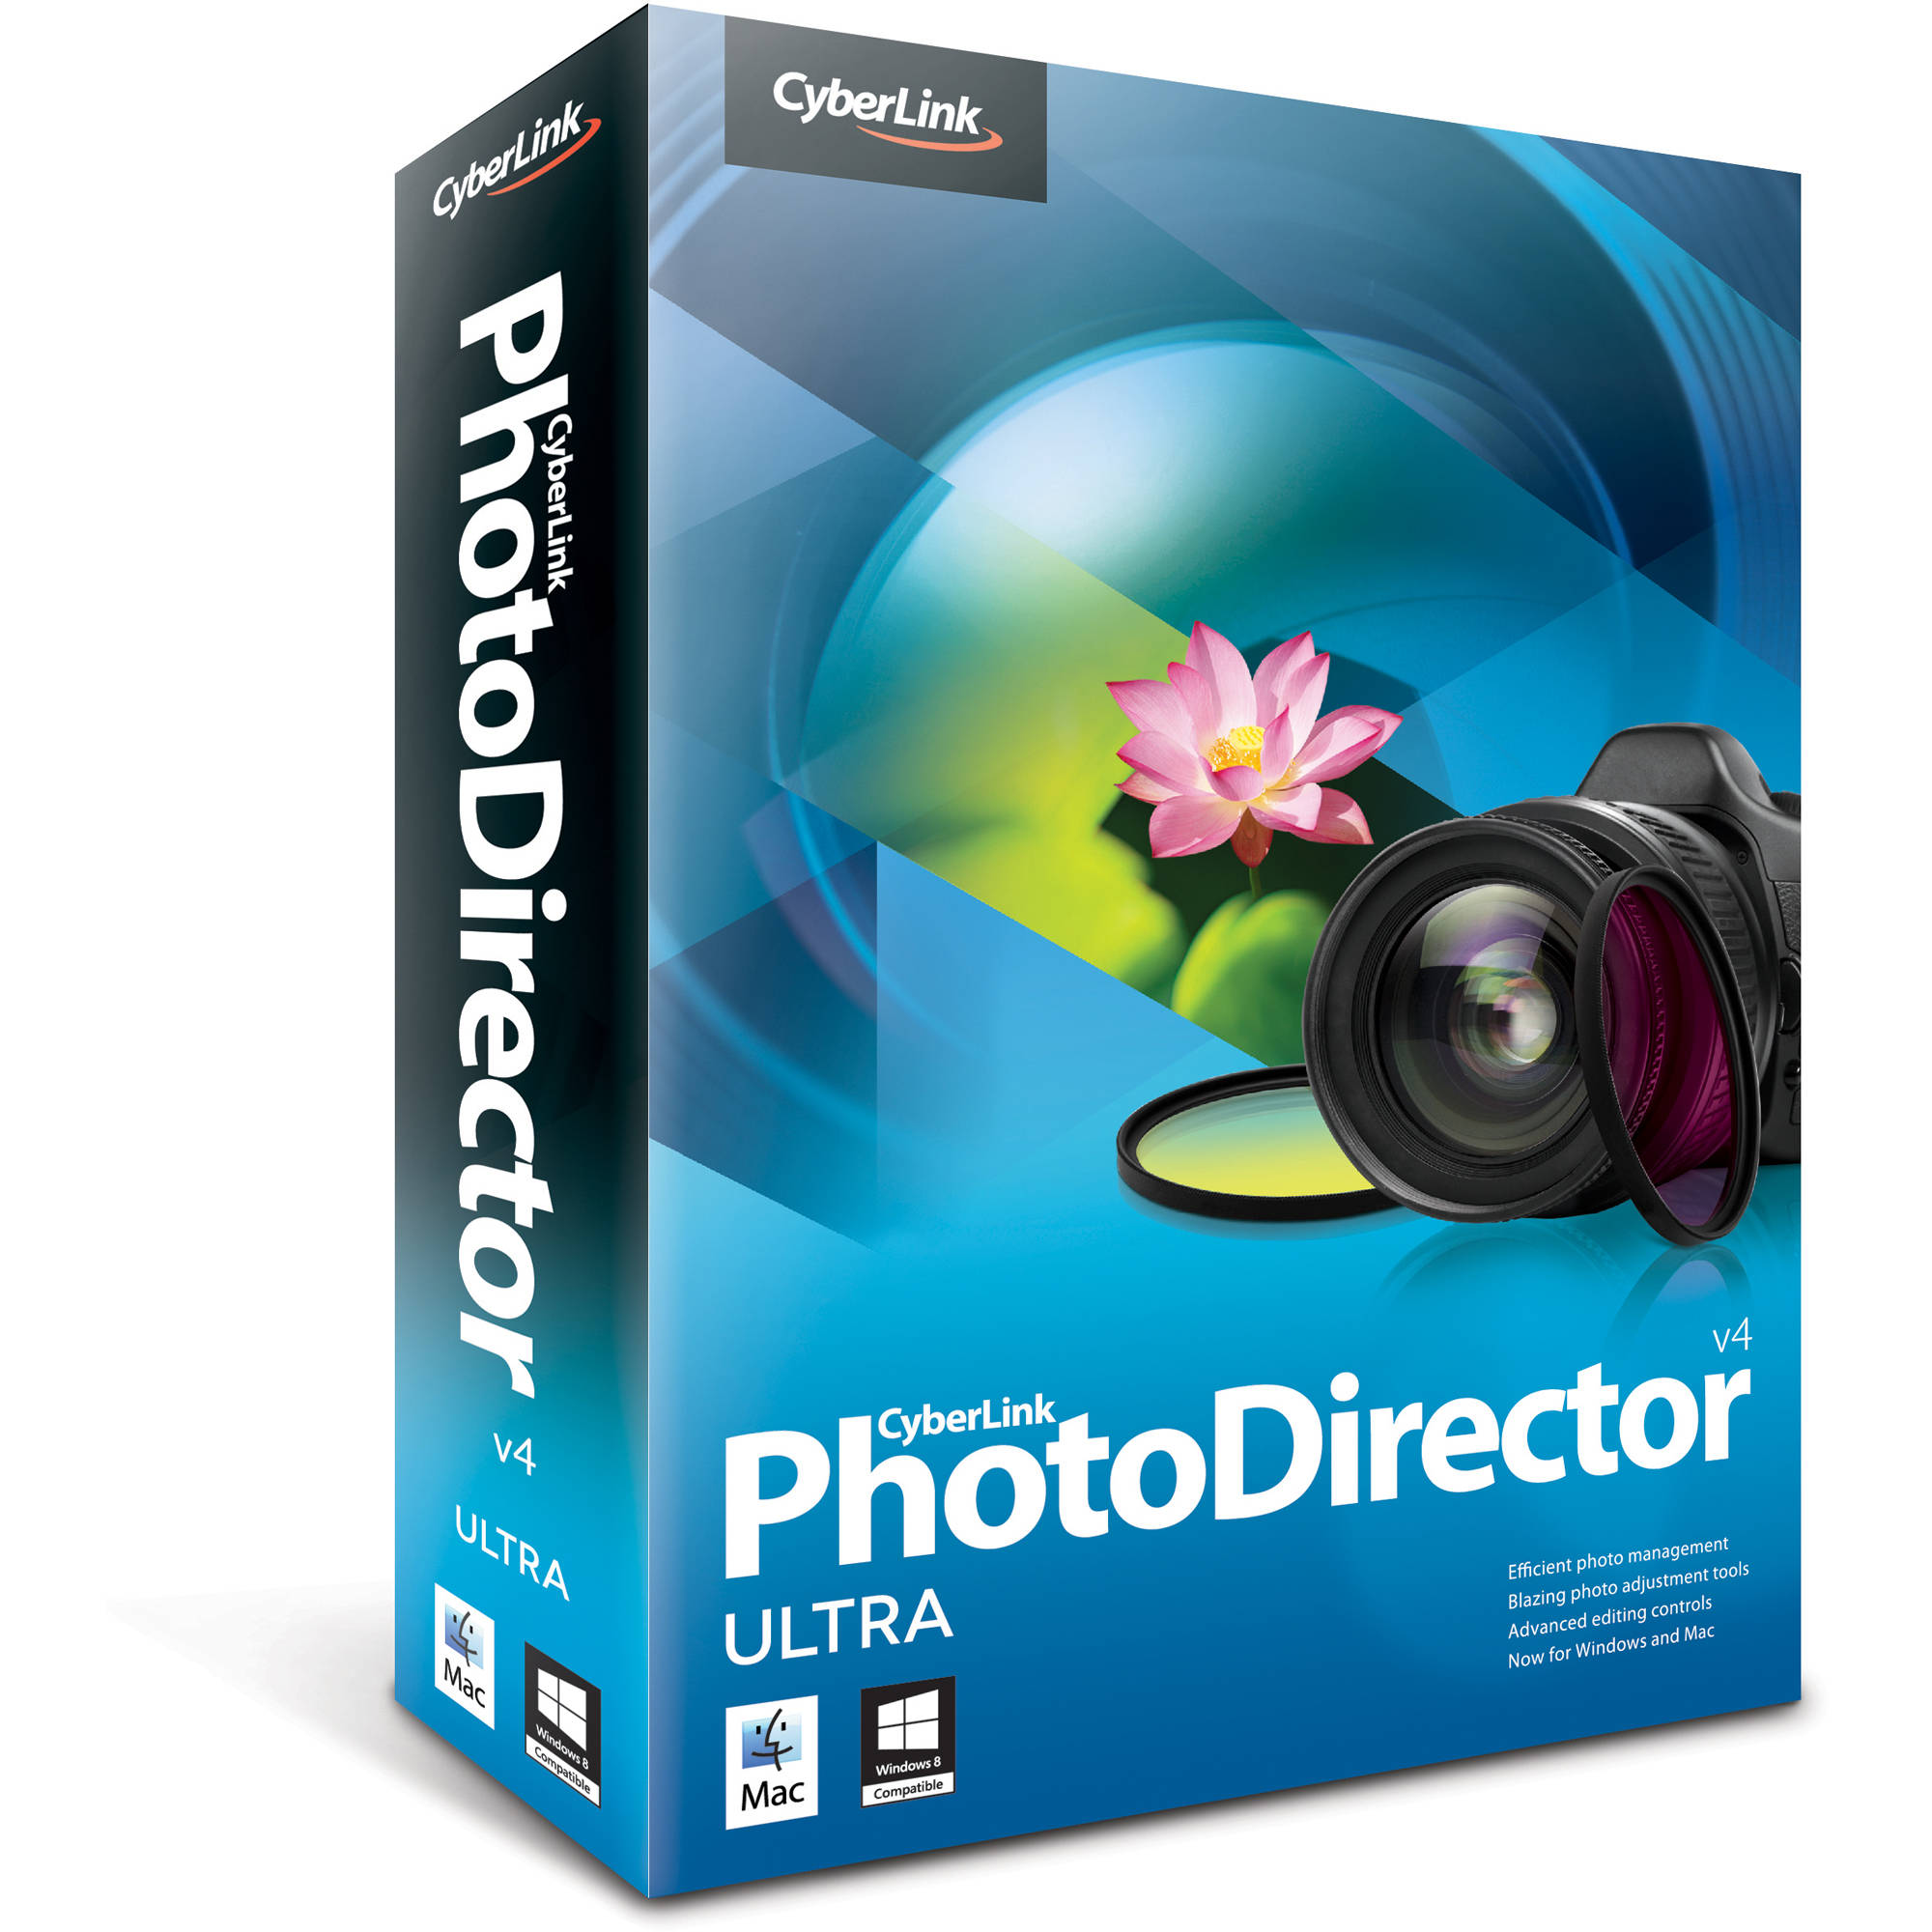 download driver for finepix hs10 on mac